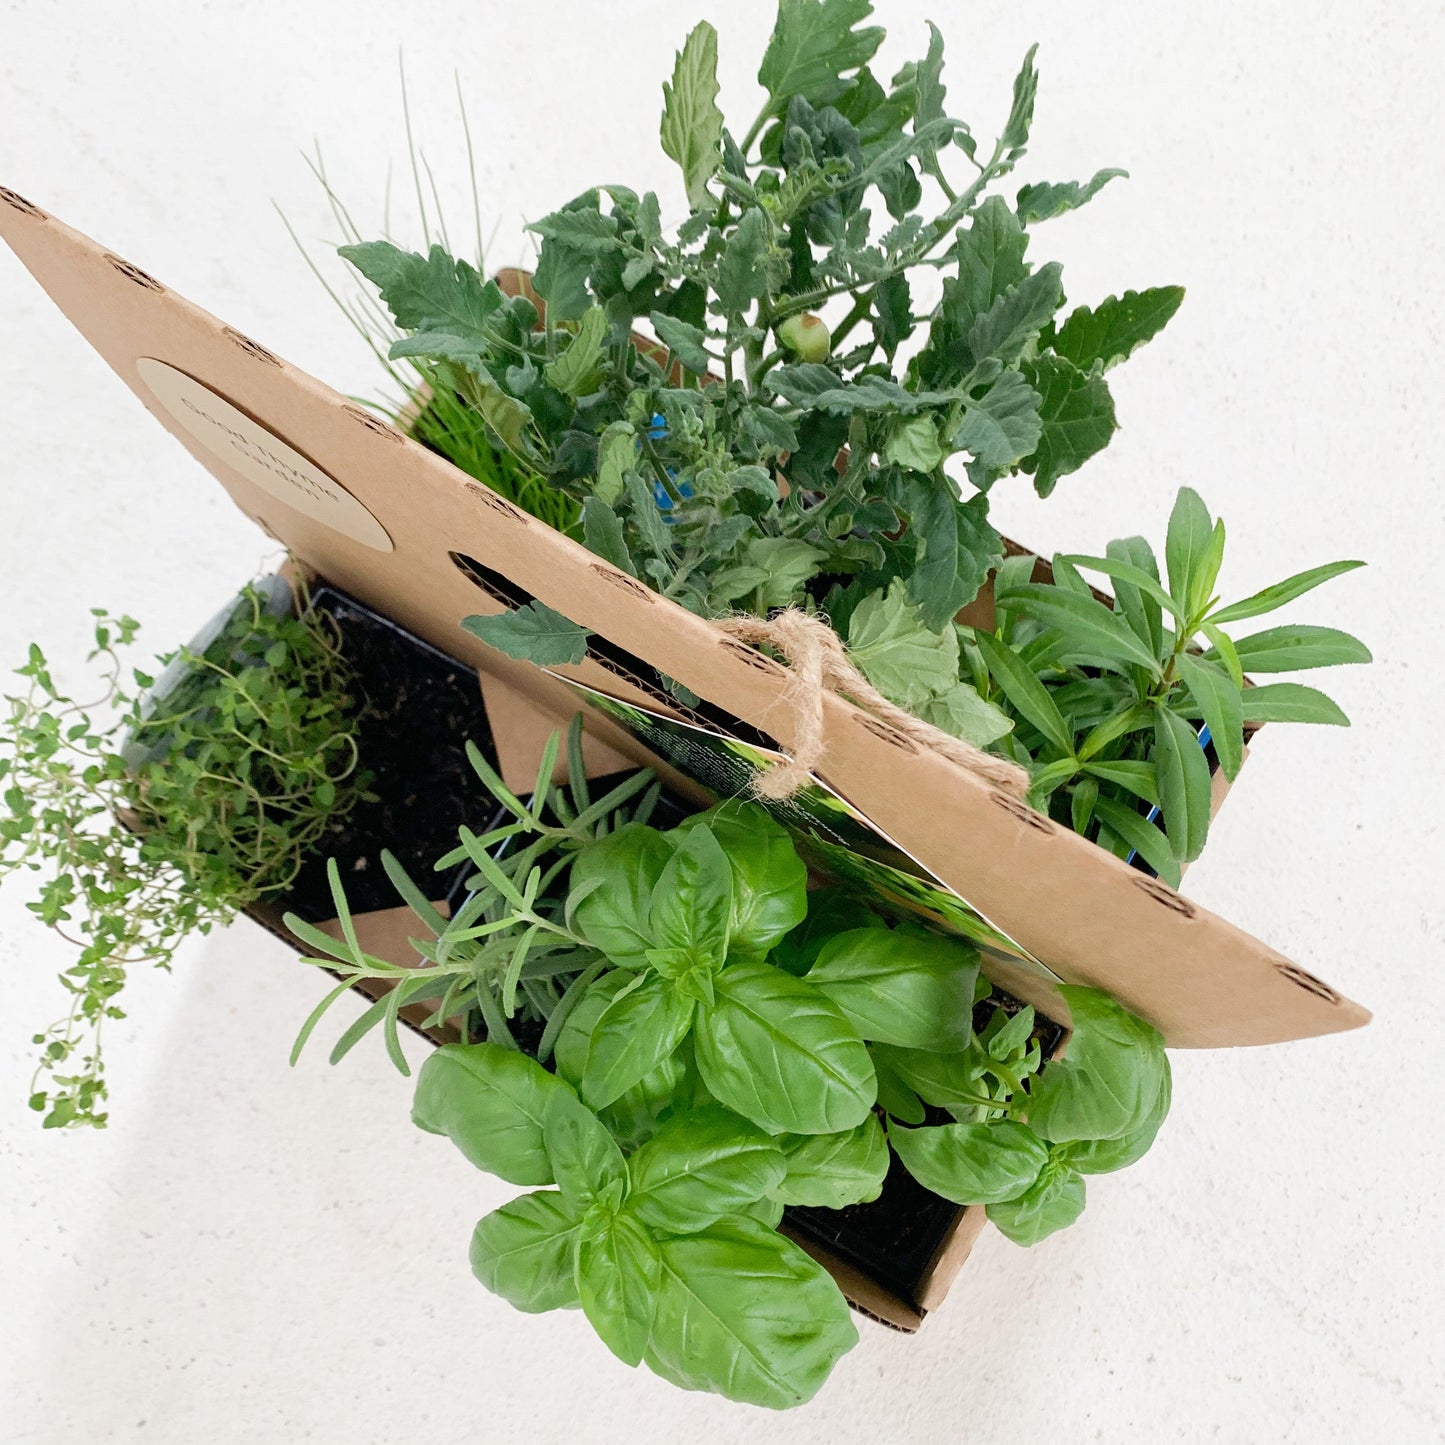 Homegrown Garden Kit with leafy green plants & tools